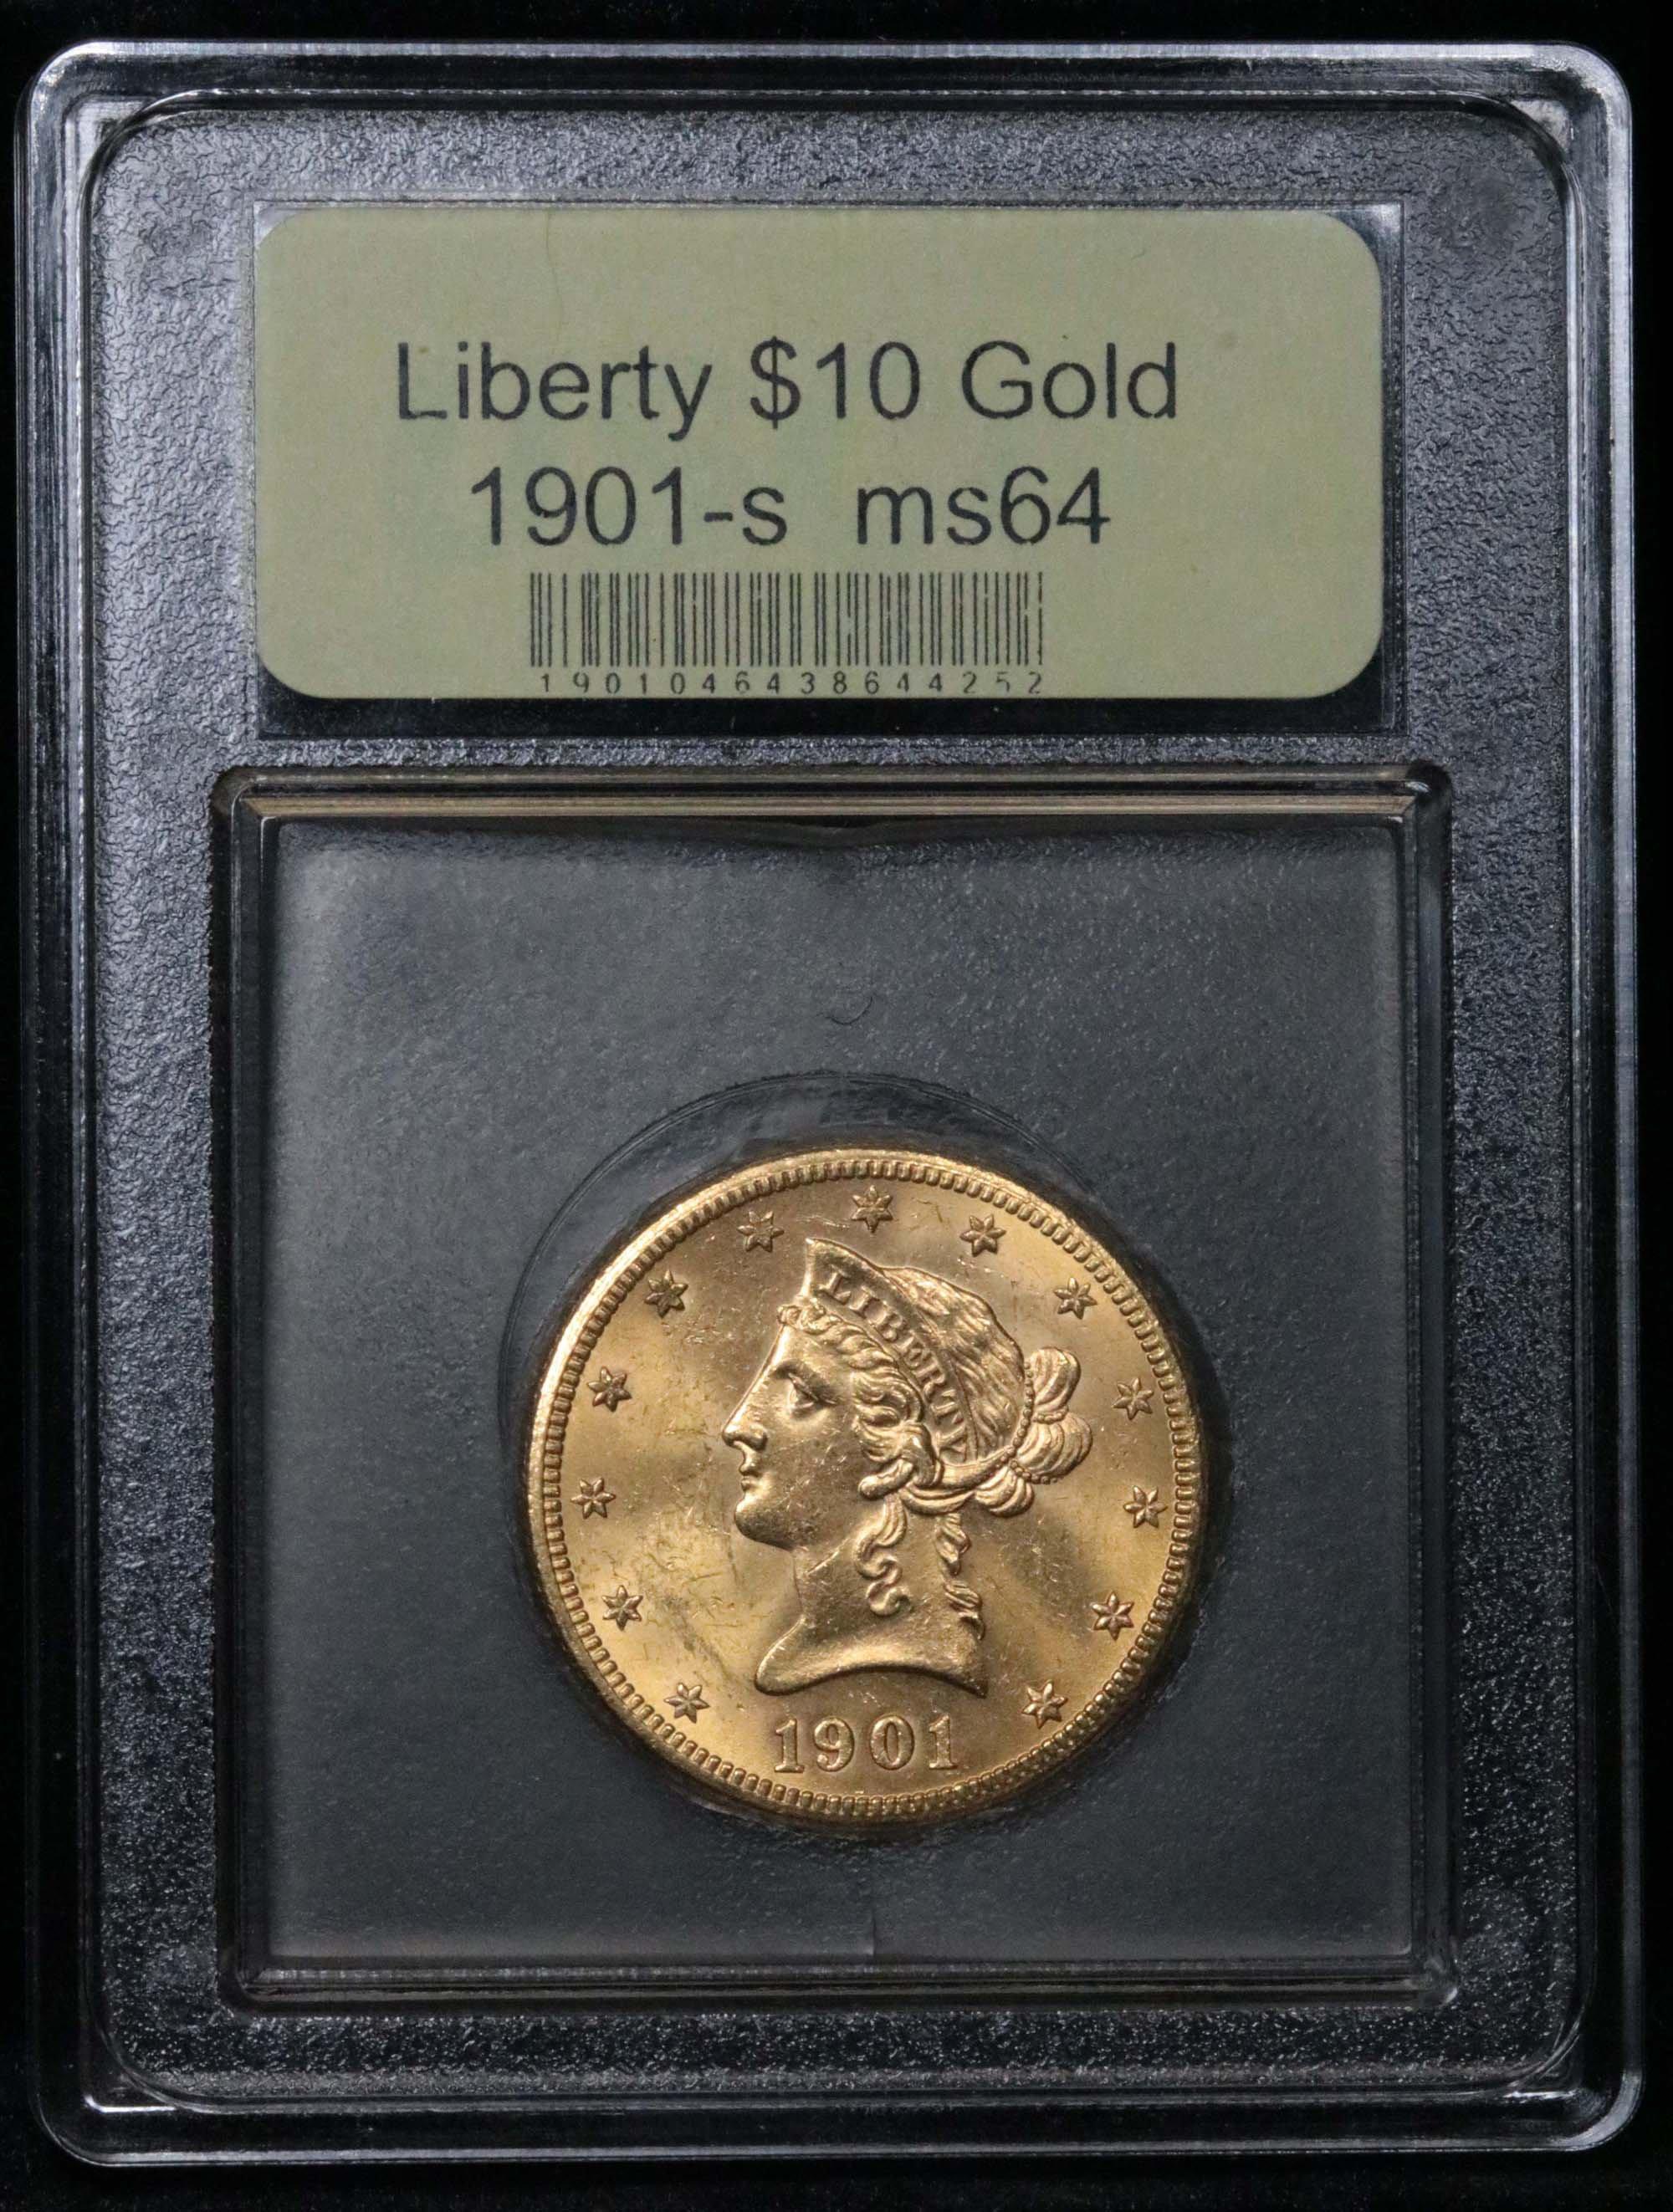 ***Auction Highlight*** 1901-s Gold Liberty Eagle $10 Graded Choice Unc by